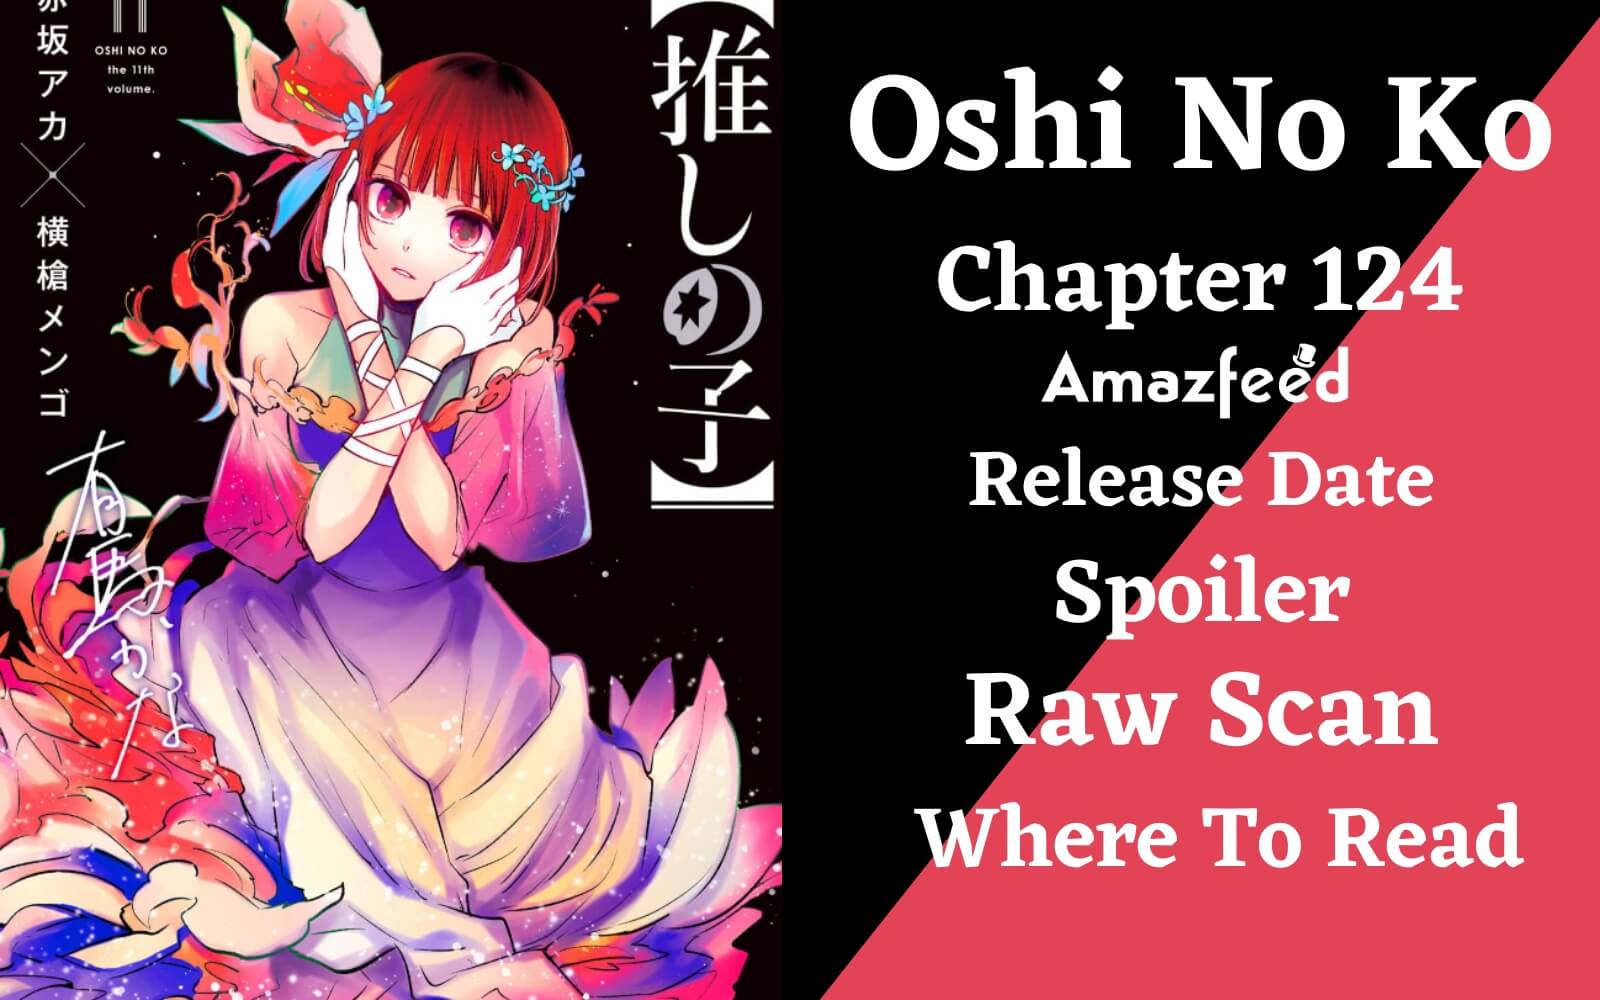 Oshi no Ko chapter 124: Oshi no Ko Chapter 124: Release date, time, plot  and all you need to know - The Economic Times